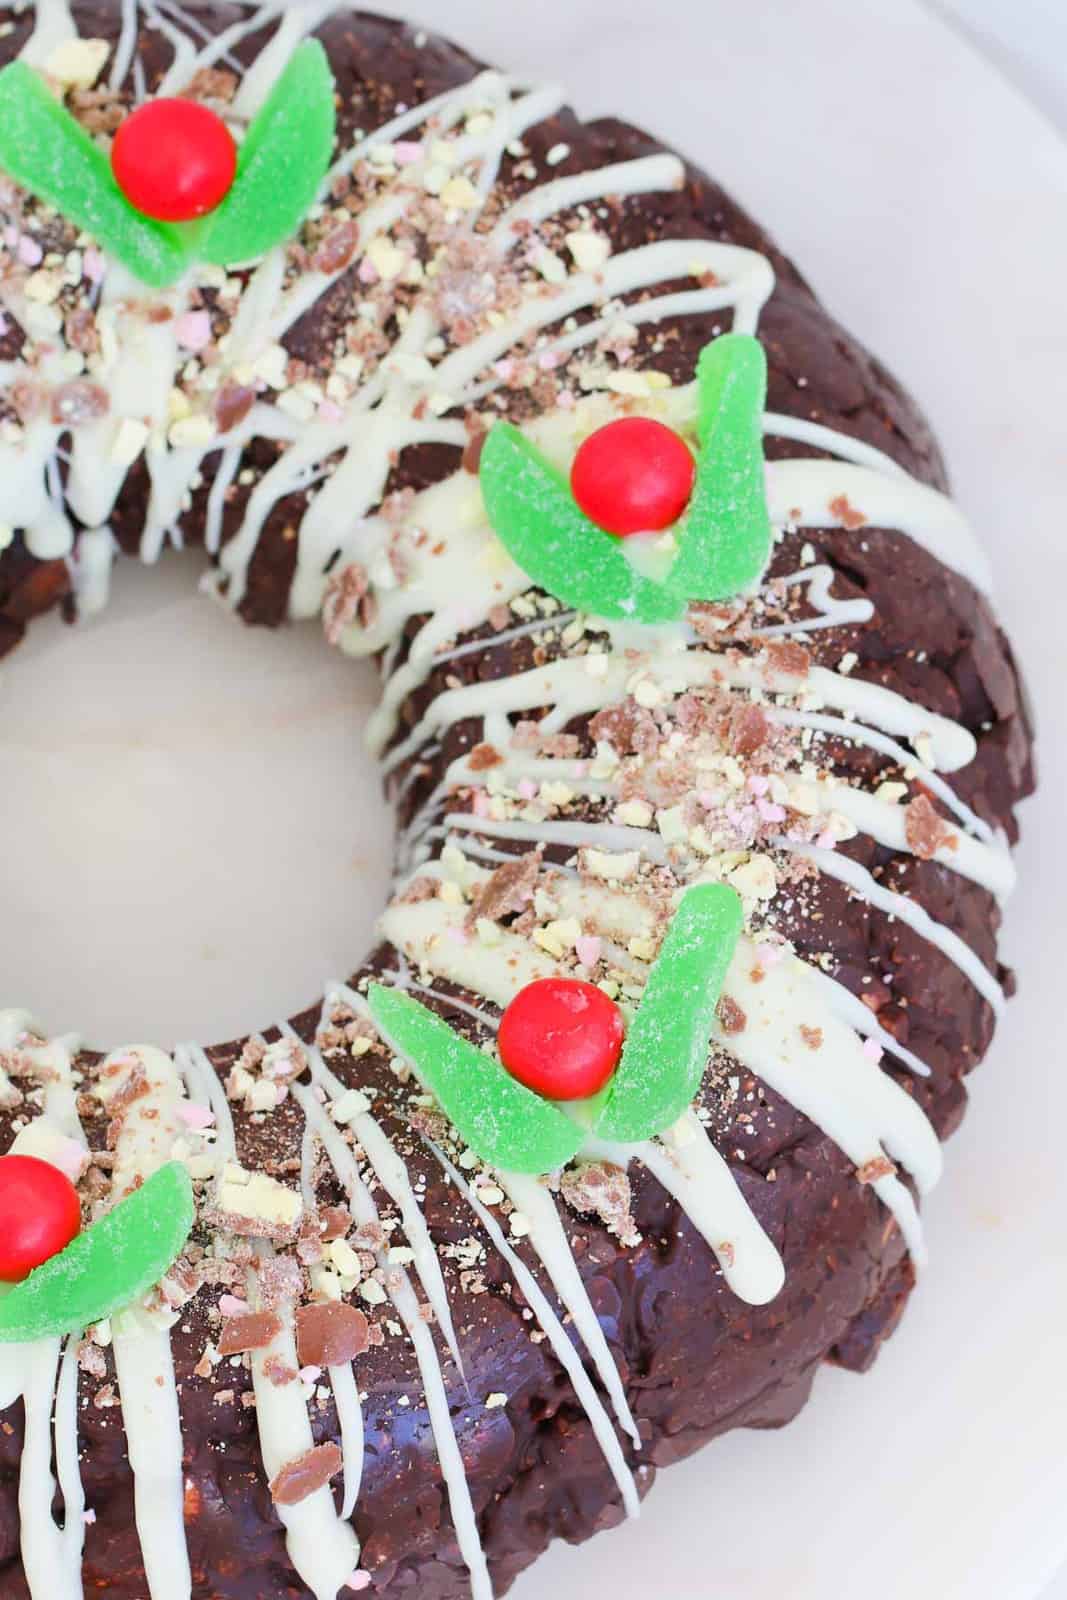 A rocky road wreath with candy Christmas decorations to resemble holly leaves and berries.